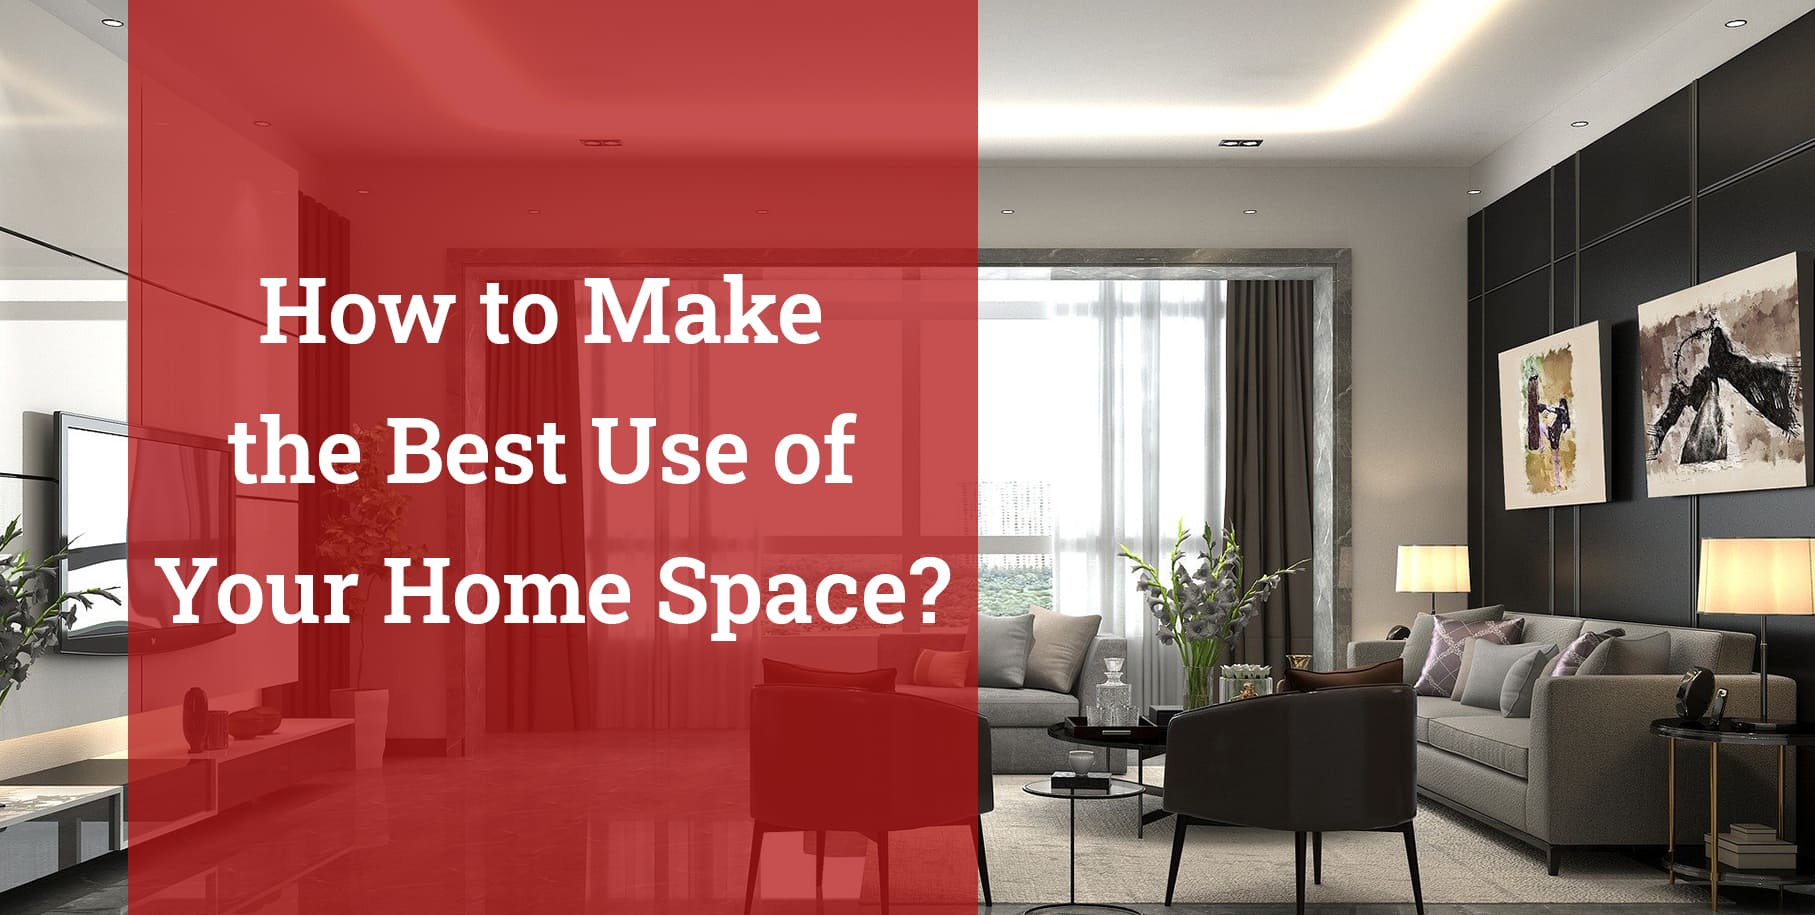 How to Make the Best Use of Your Home Space?